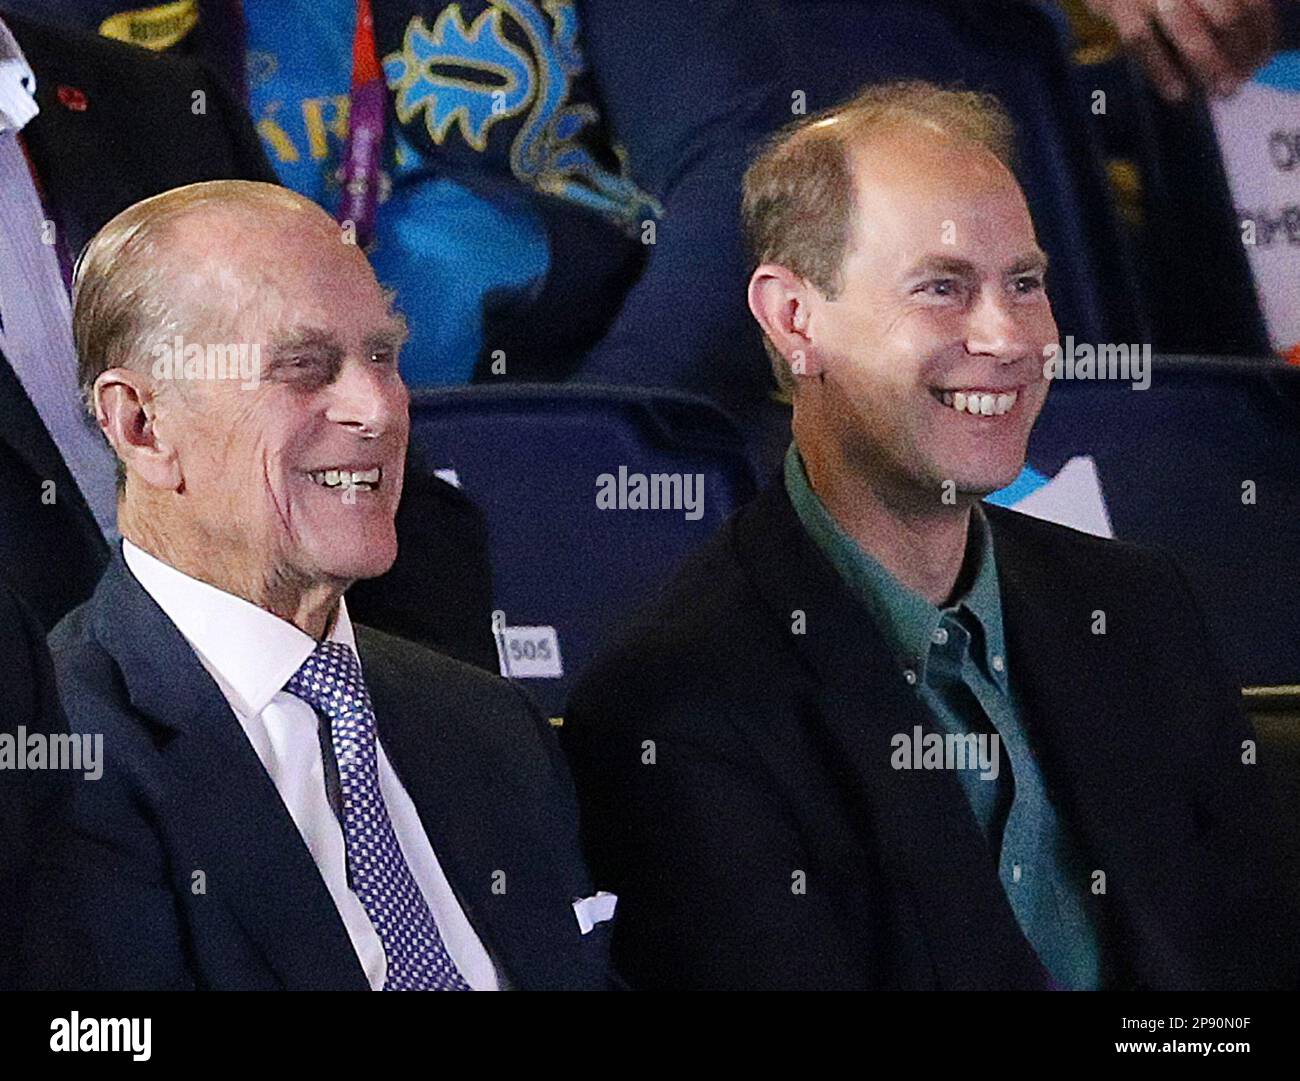 File photo dated 02/08/12 of the late Duke of Edinburgh (left) and the Earl of Wessex, watching Great Britain's Anthony Ogogo in his fight against Ukraine's Levgen Khytrov in the Men's Middleweight (75kg) fight at the Excel Arena, London, during day 5 of the London Olympic Games. King Charles III has handed his late father's title the Duke of Edinburgh to his brother Prince Edward, honouring the late Queen and Philip's wishes. Charles conferred the title on the former Earl of Wessex in celebration of his 59th birthday. Issue date: Friday March 10, 2023. Stock Photo